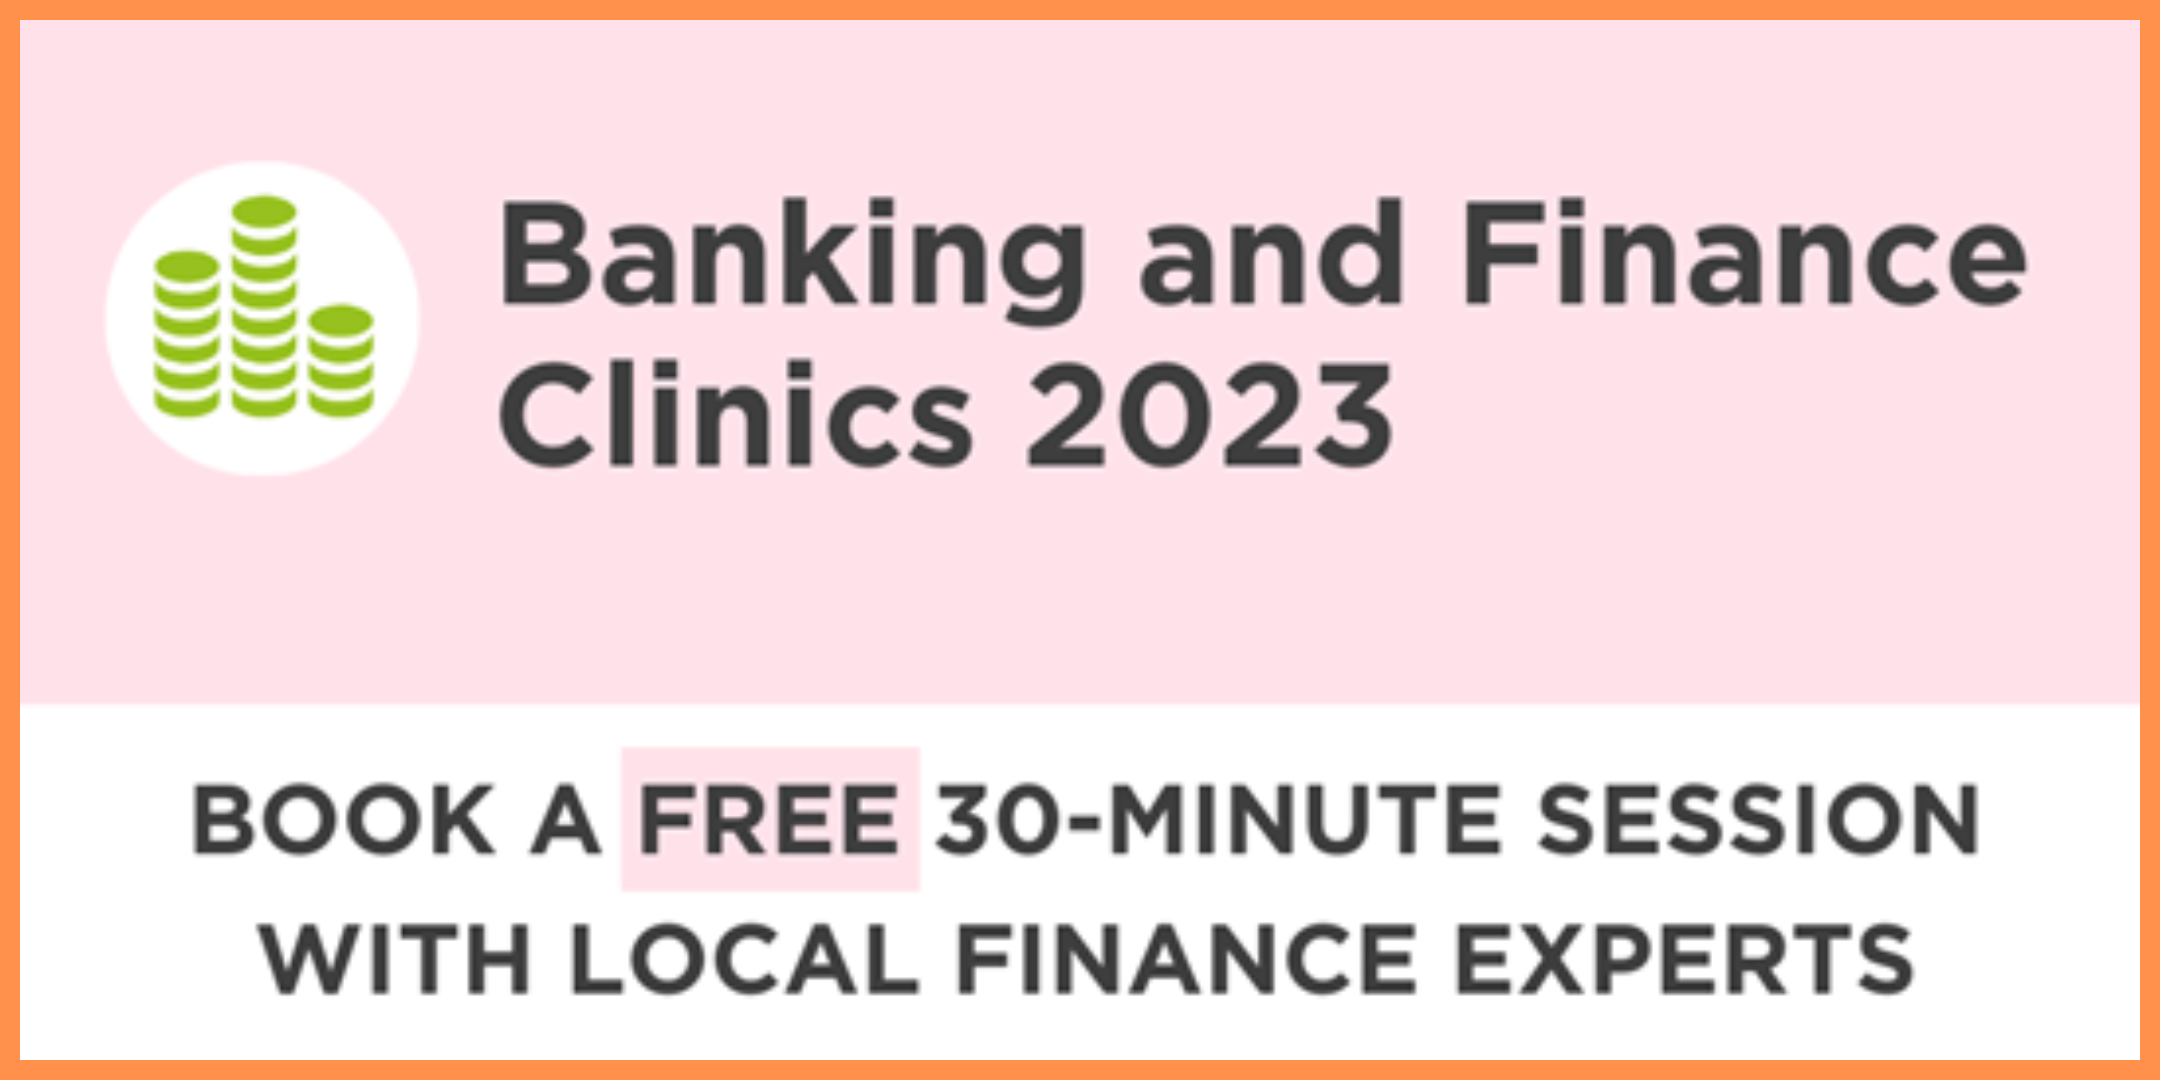 Banking and Finance clinic opens appointments for 2023 clinics